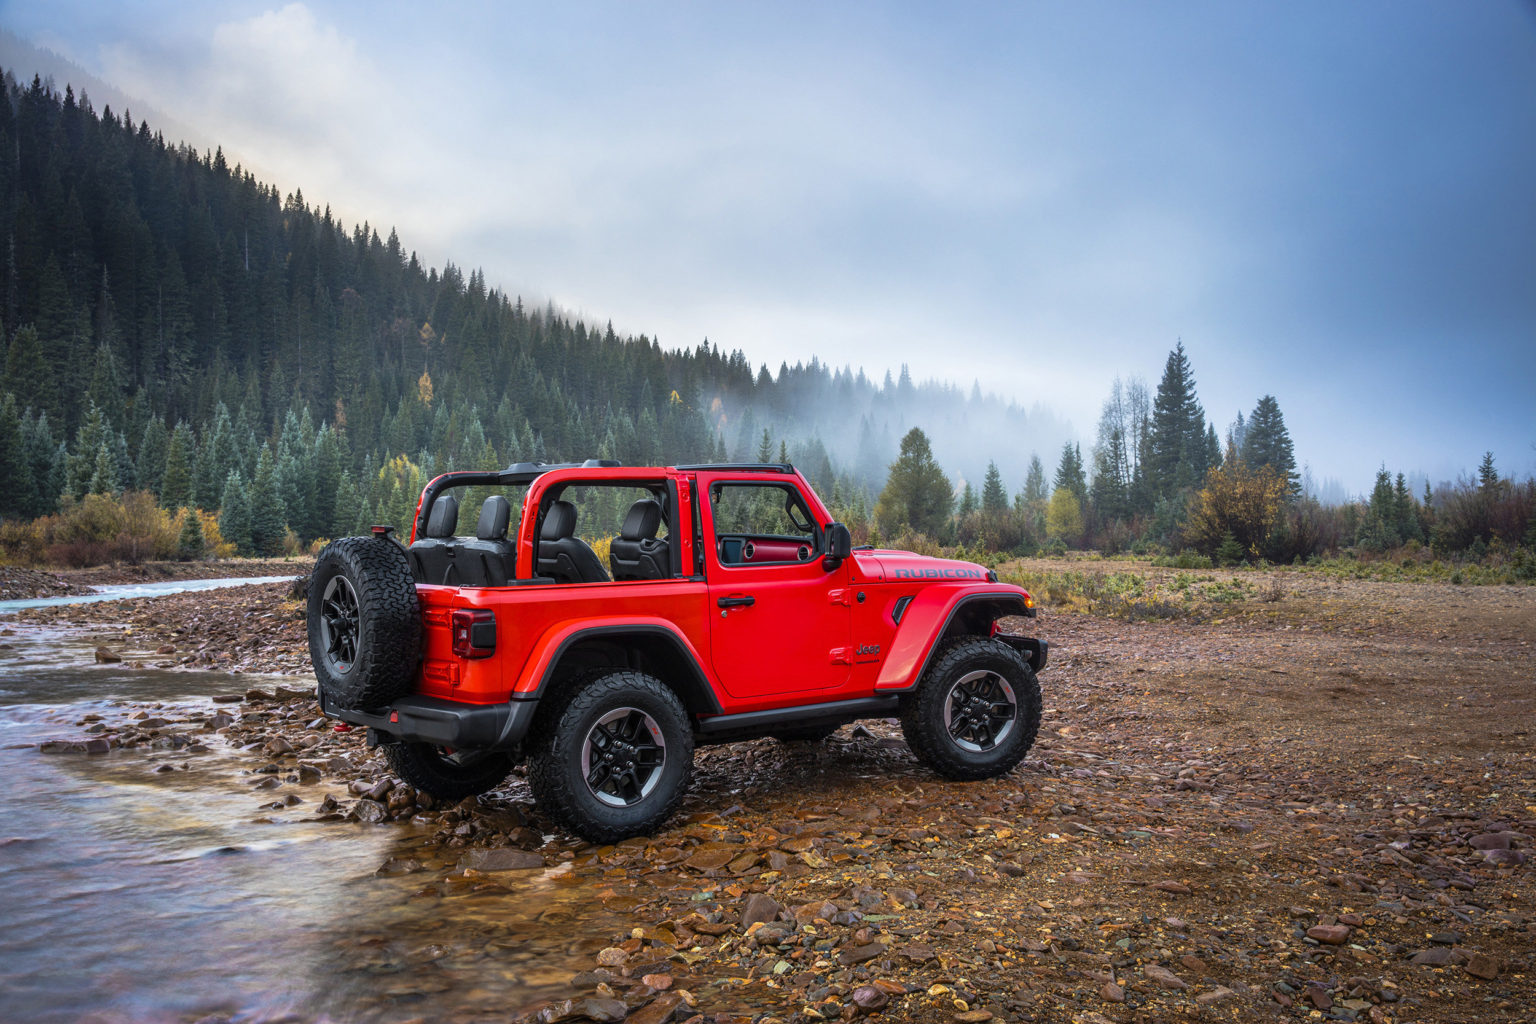 The Jeep Wrangler is able to conquer some of the toughest terrain passable by motor vehicle.